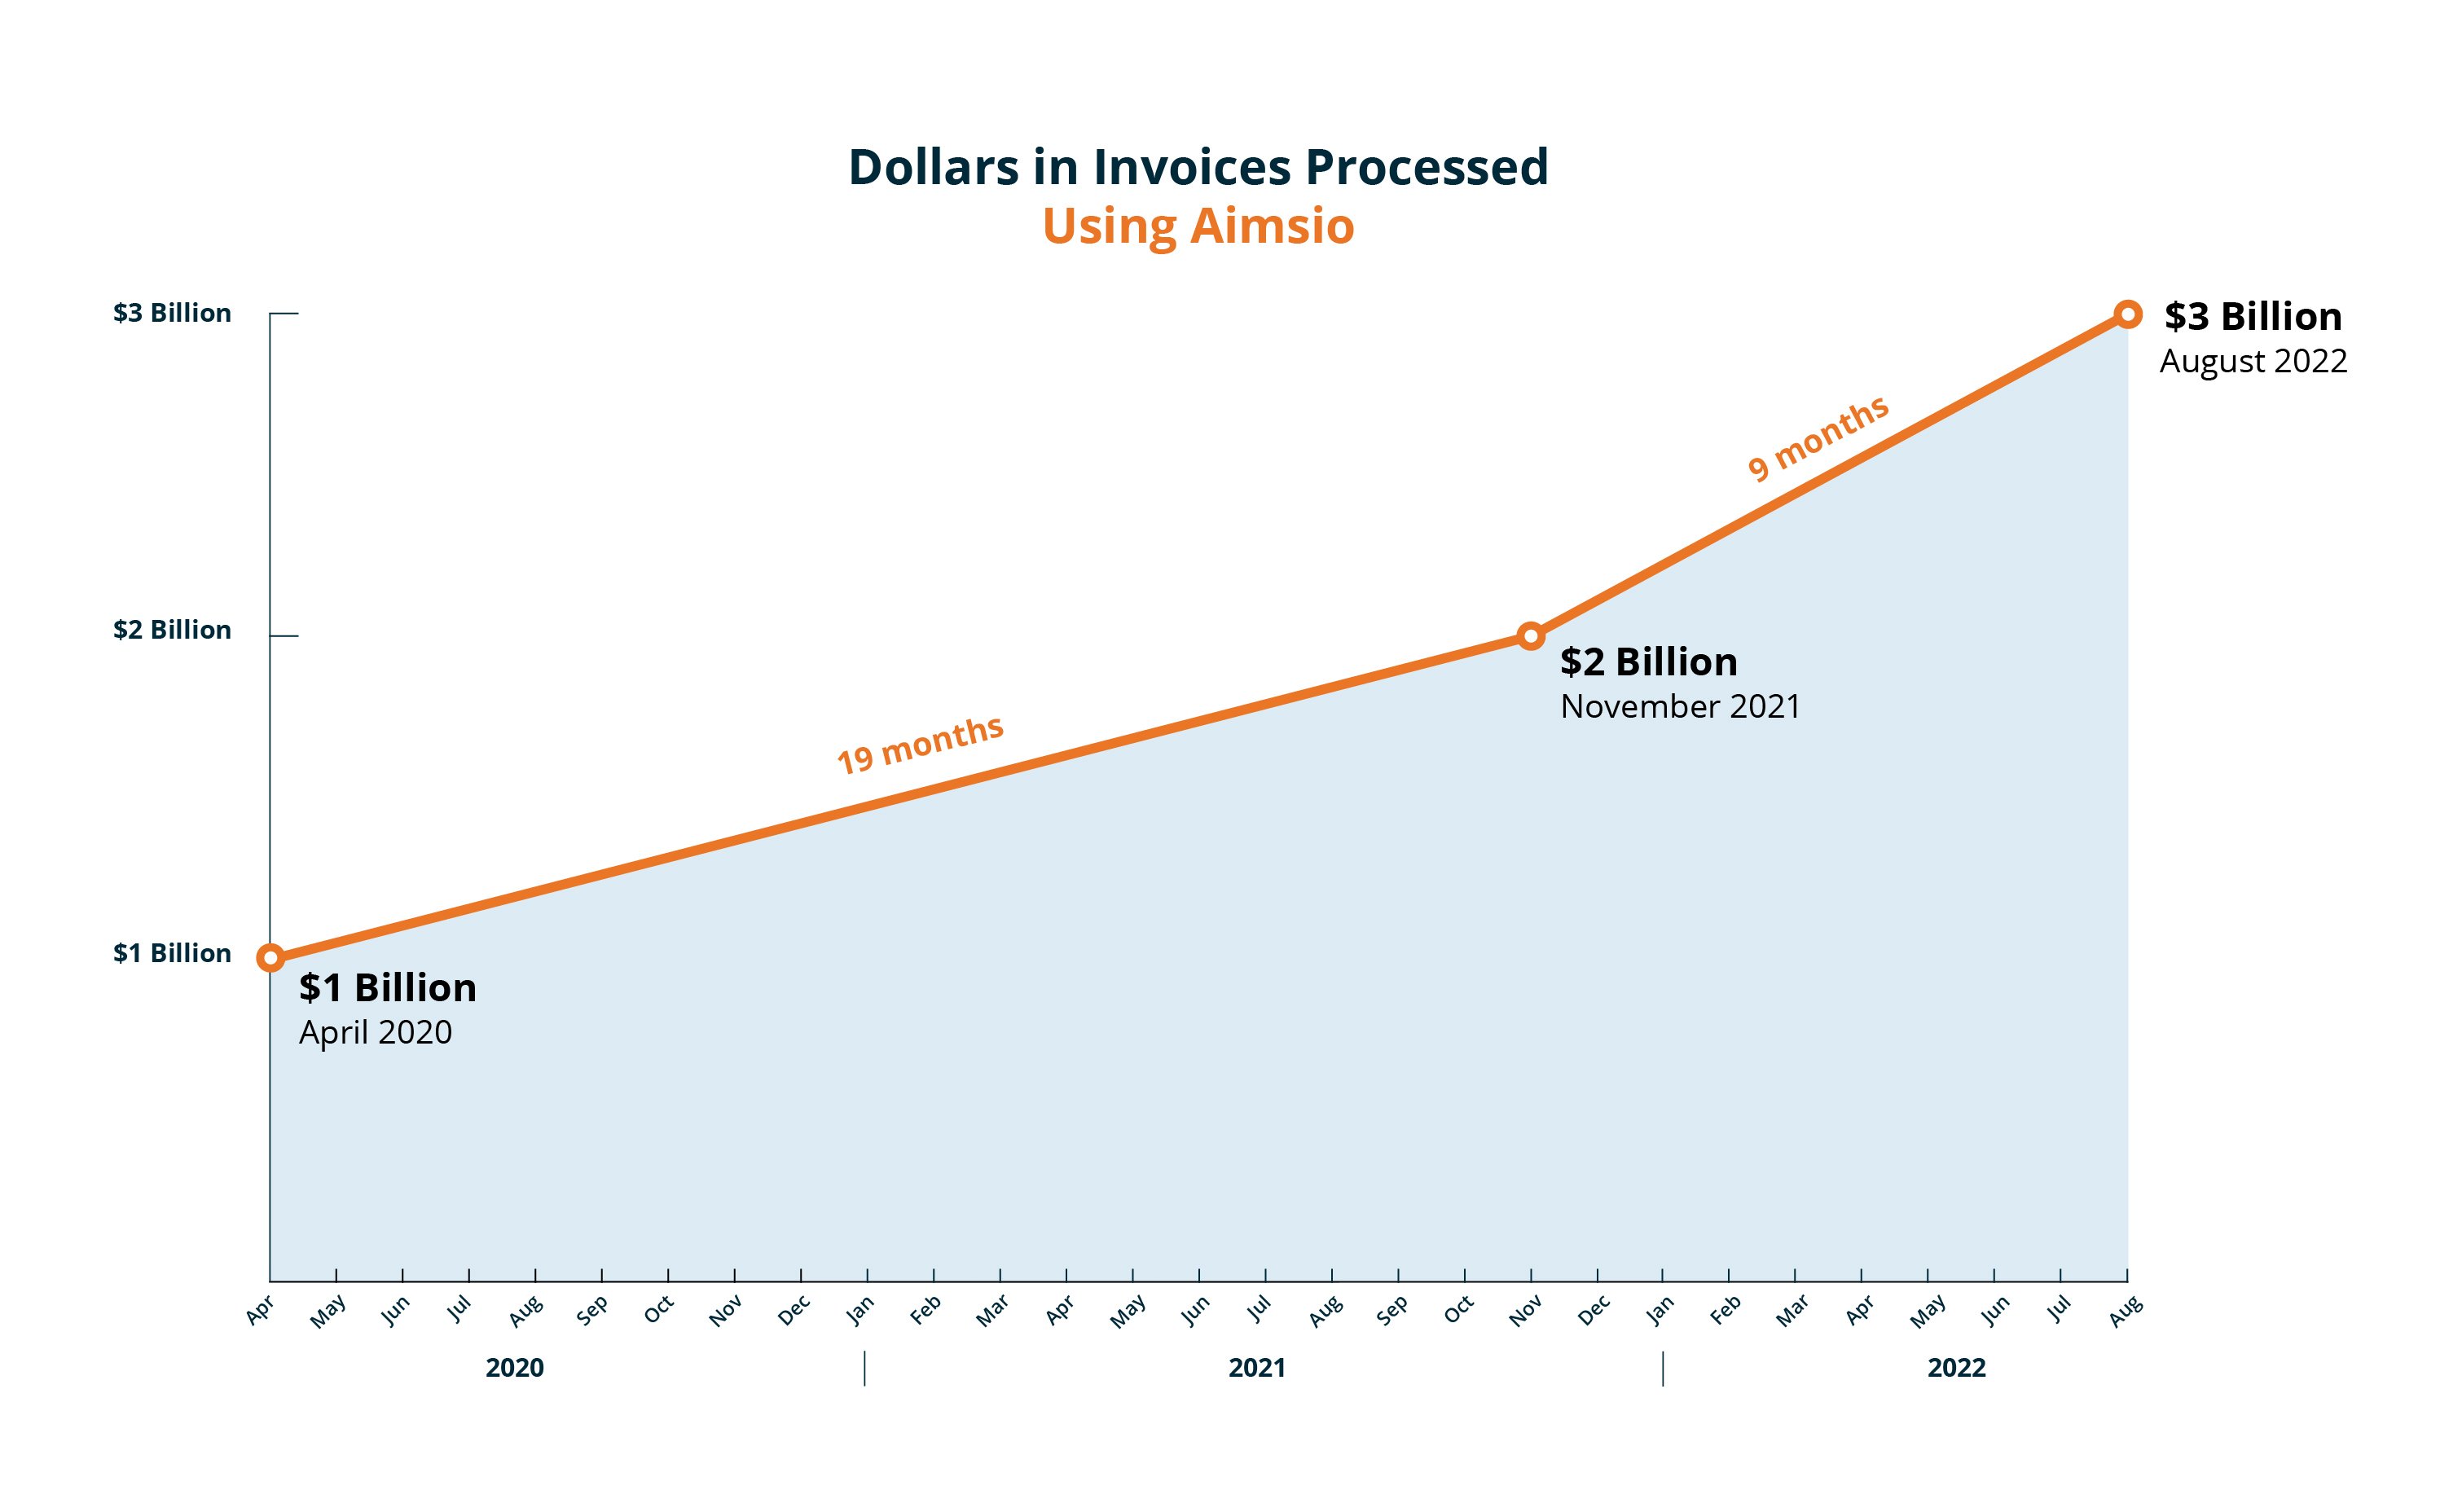 Aimsio has been used to process 3 billion dollars worth of invoices